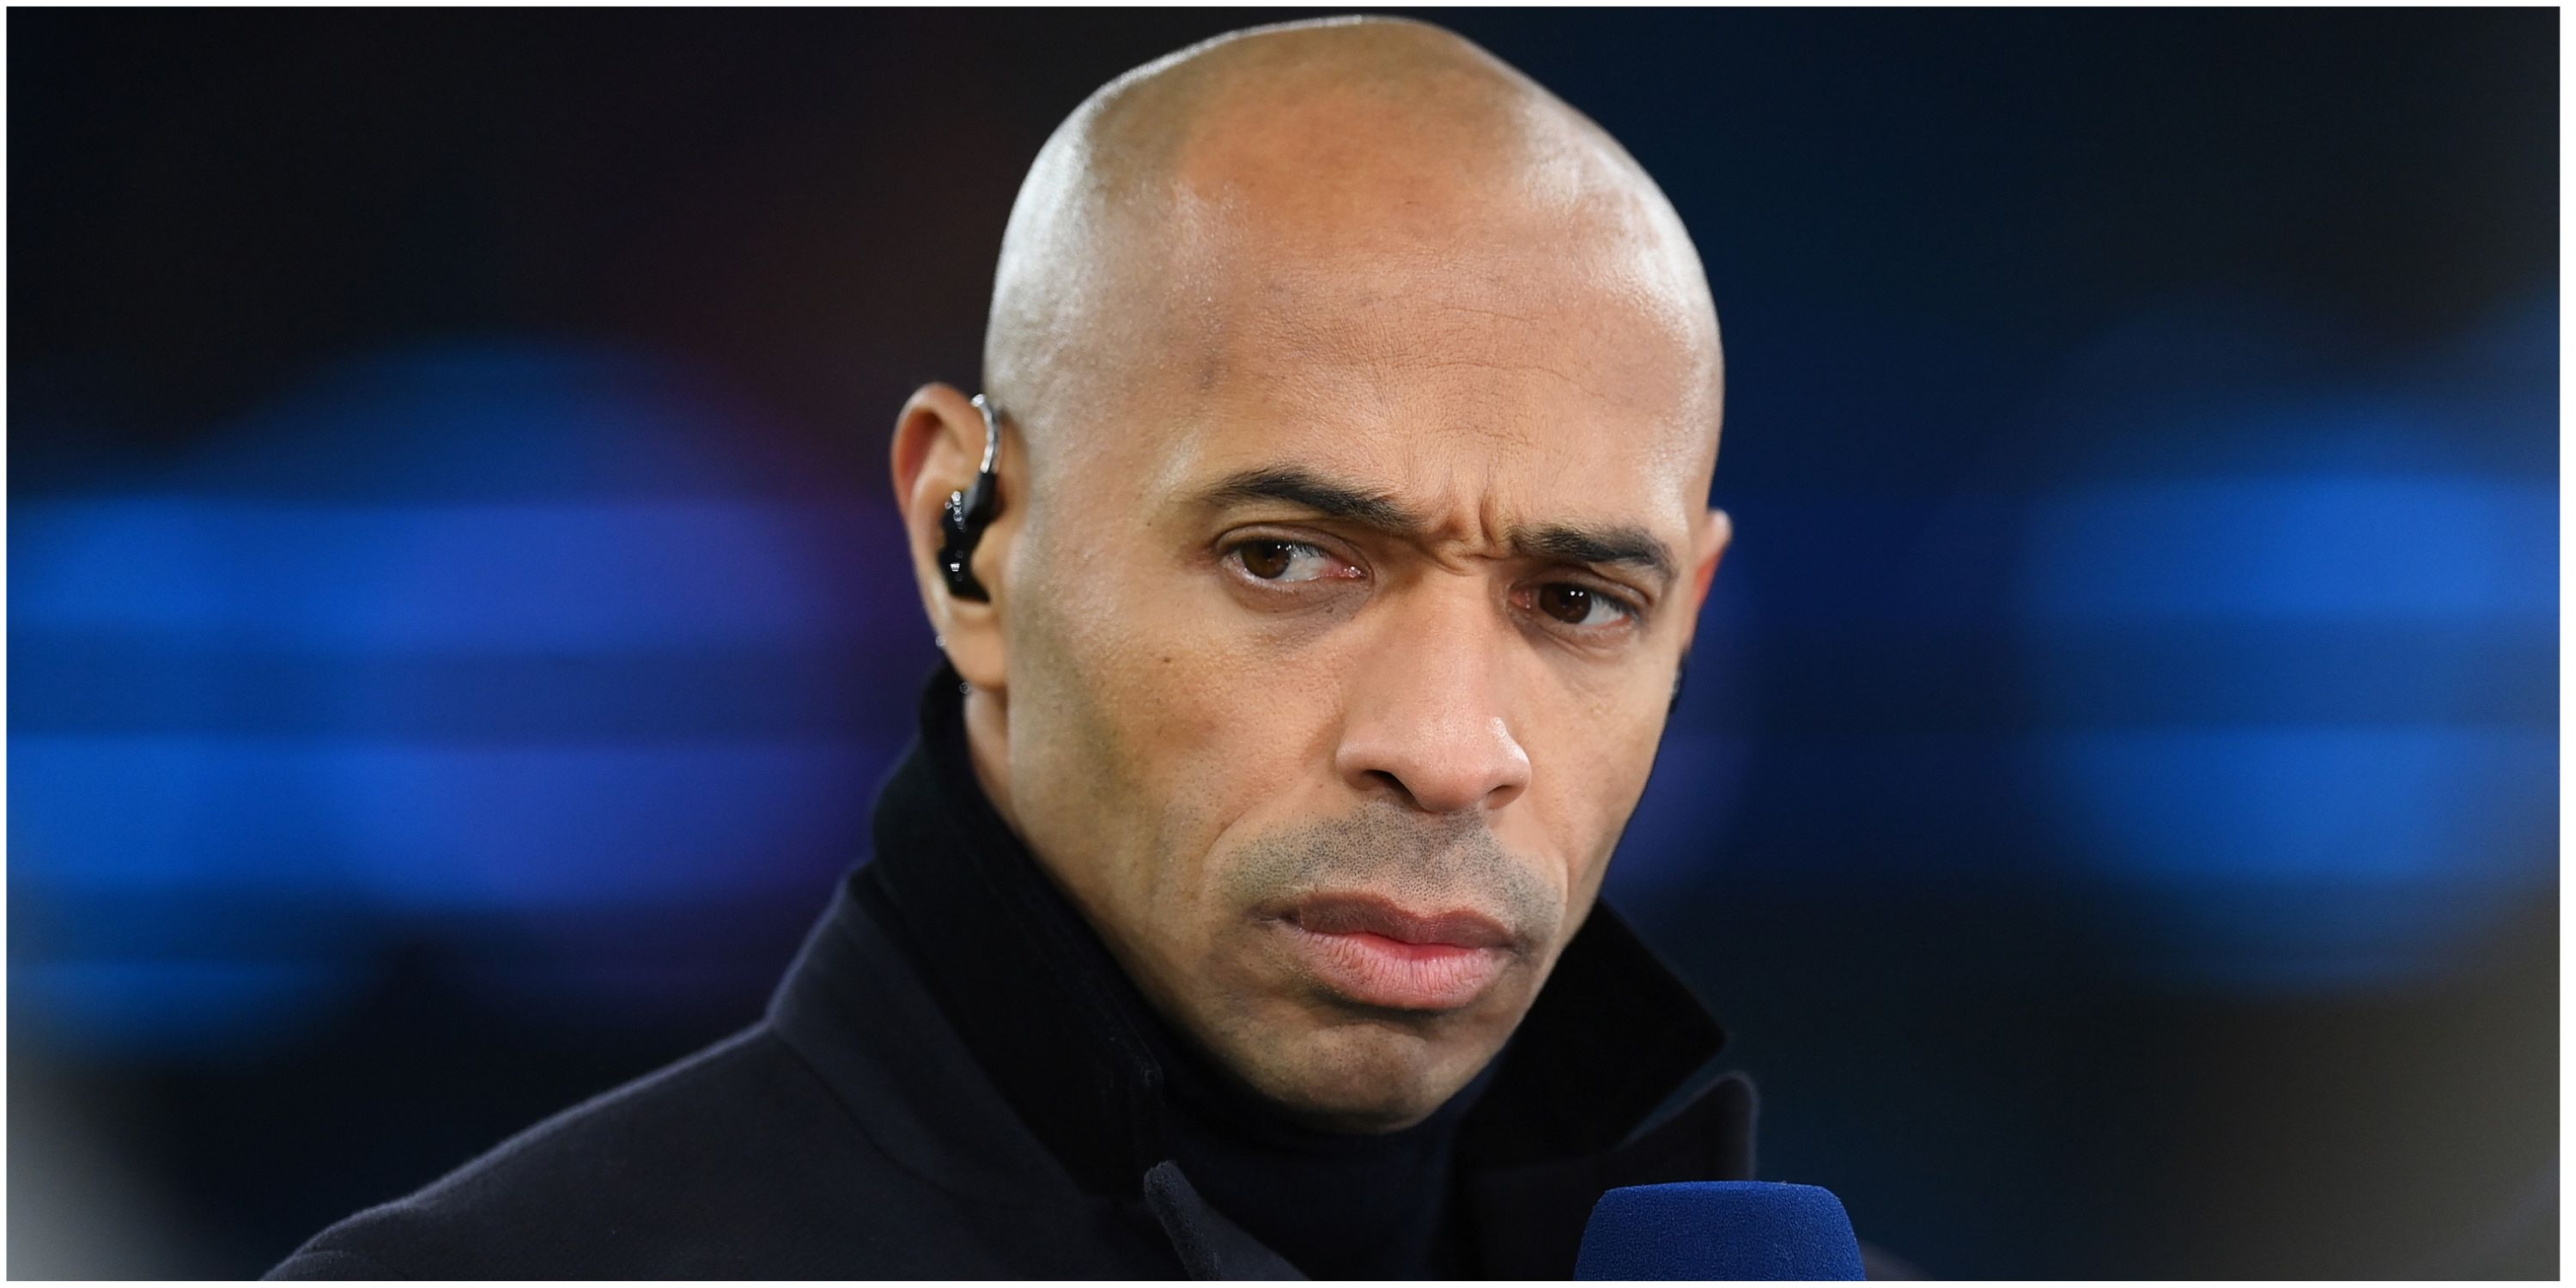 Thierry Henry stunned by official Man of the Match decision after Real Madrid 1-1 Man City